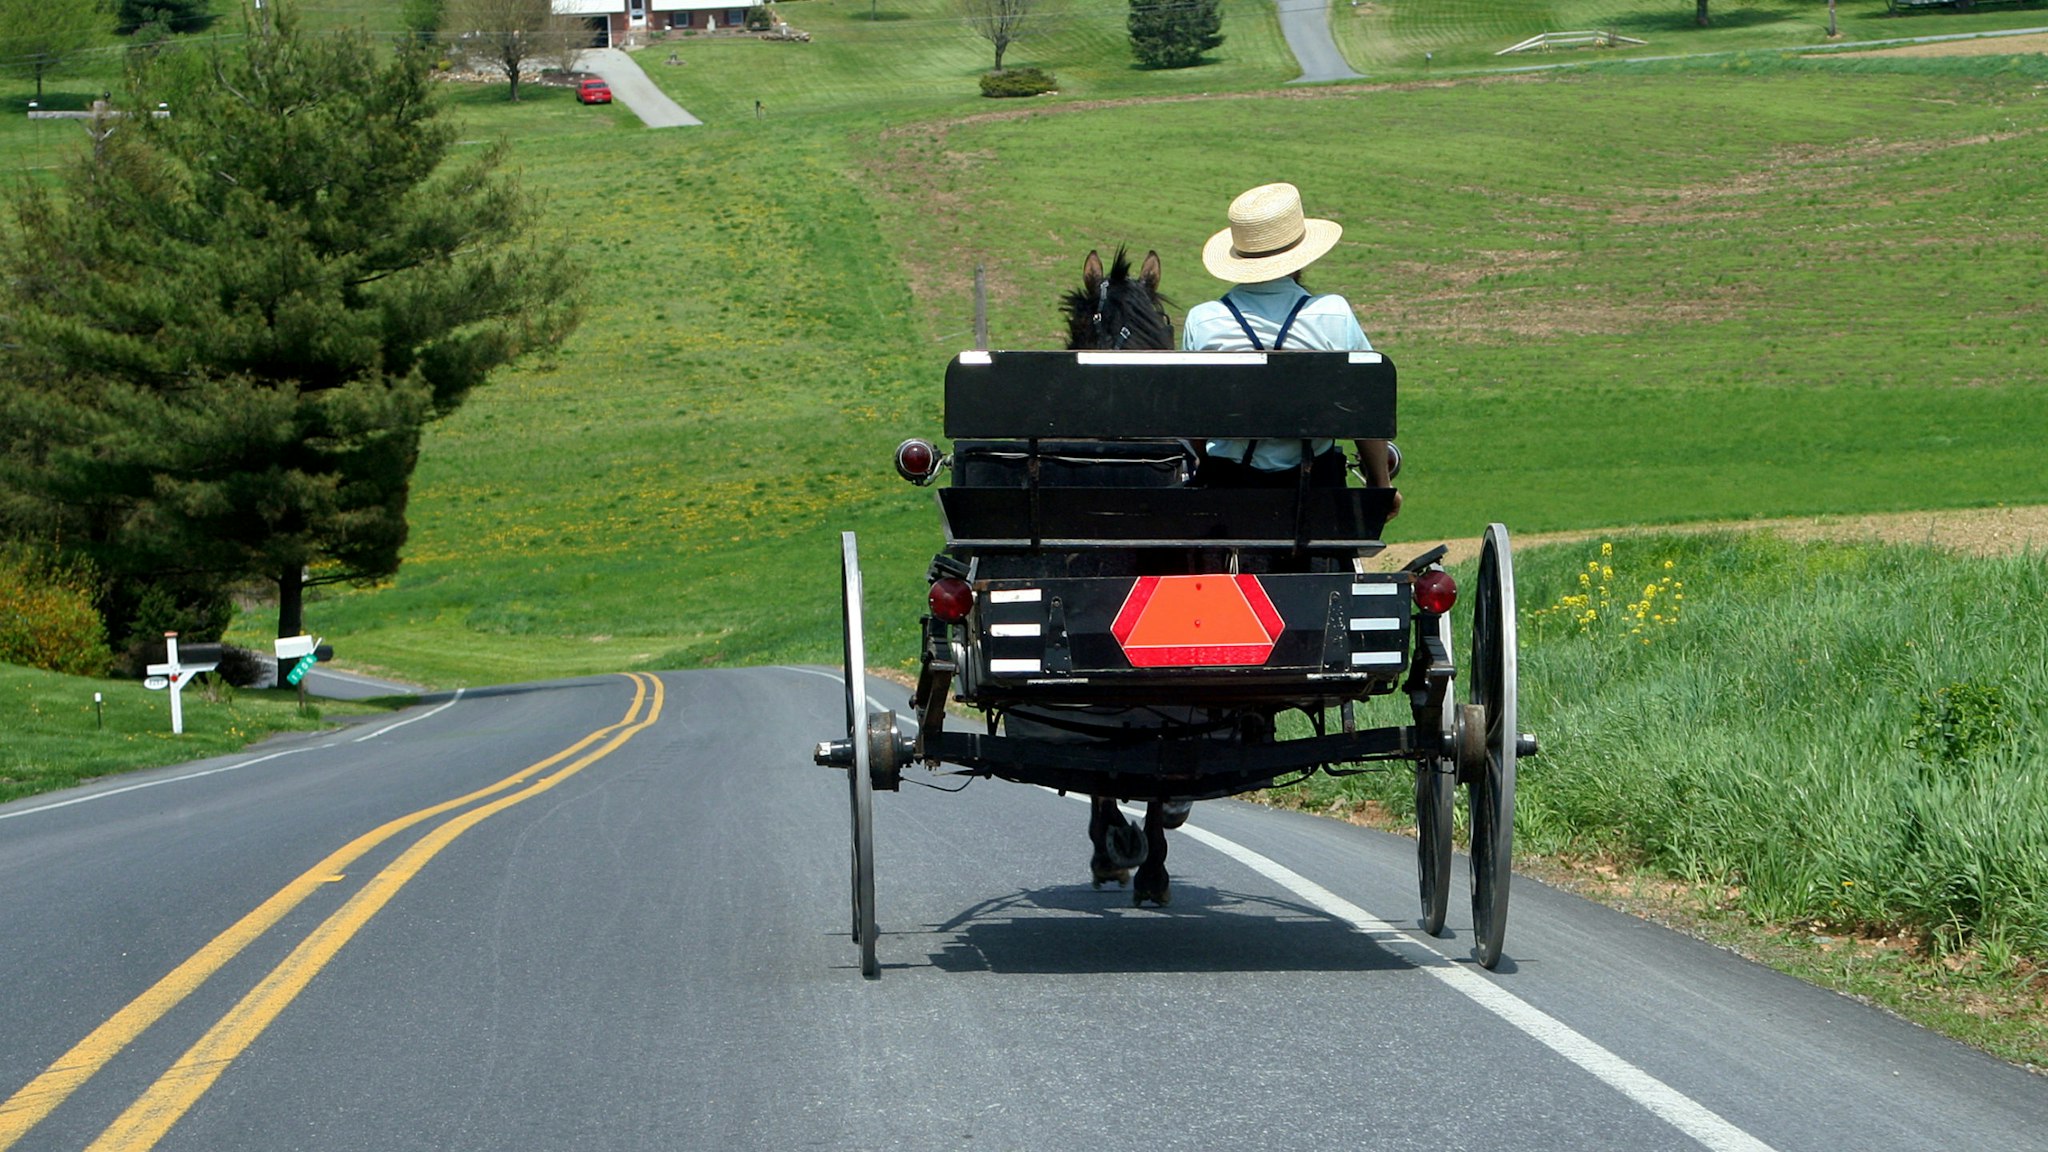 A man driving an Amish buggy down a sloping road - stock photo An open Amish Buggy makes its way to town.